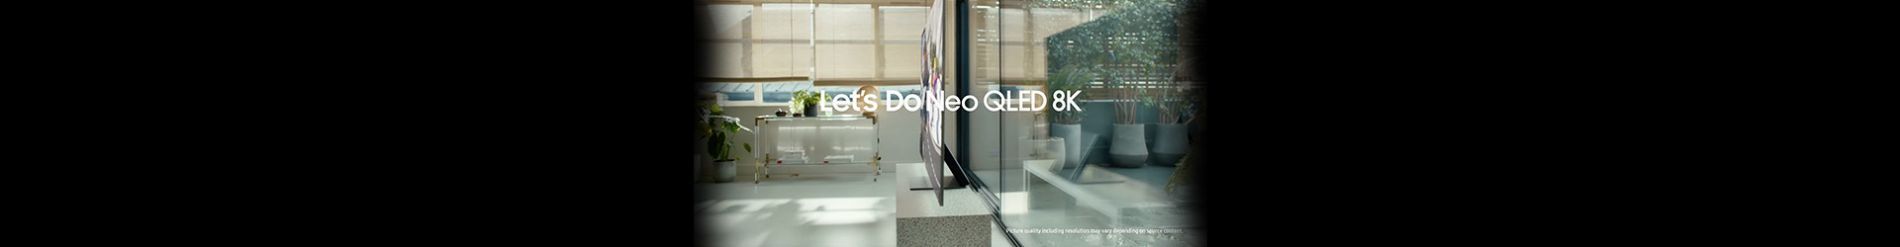 'Move It' by Jaded in Global Samsung Neo QLED 8K TV ad!